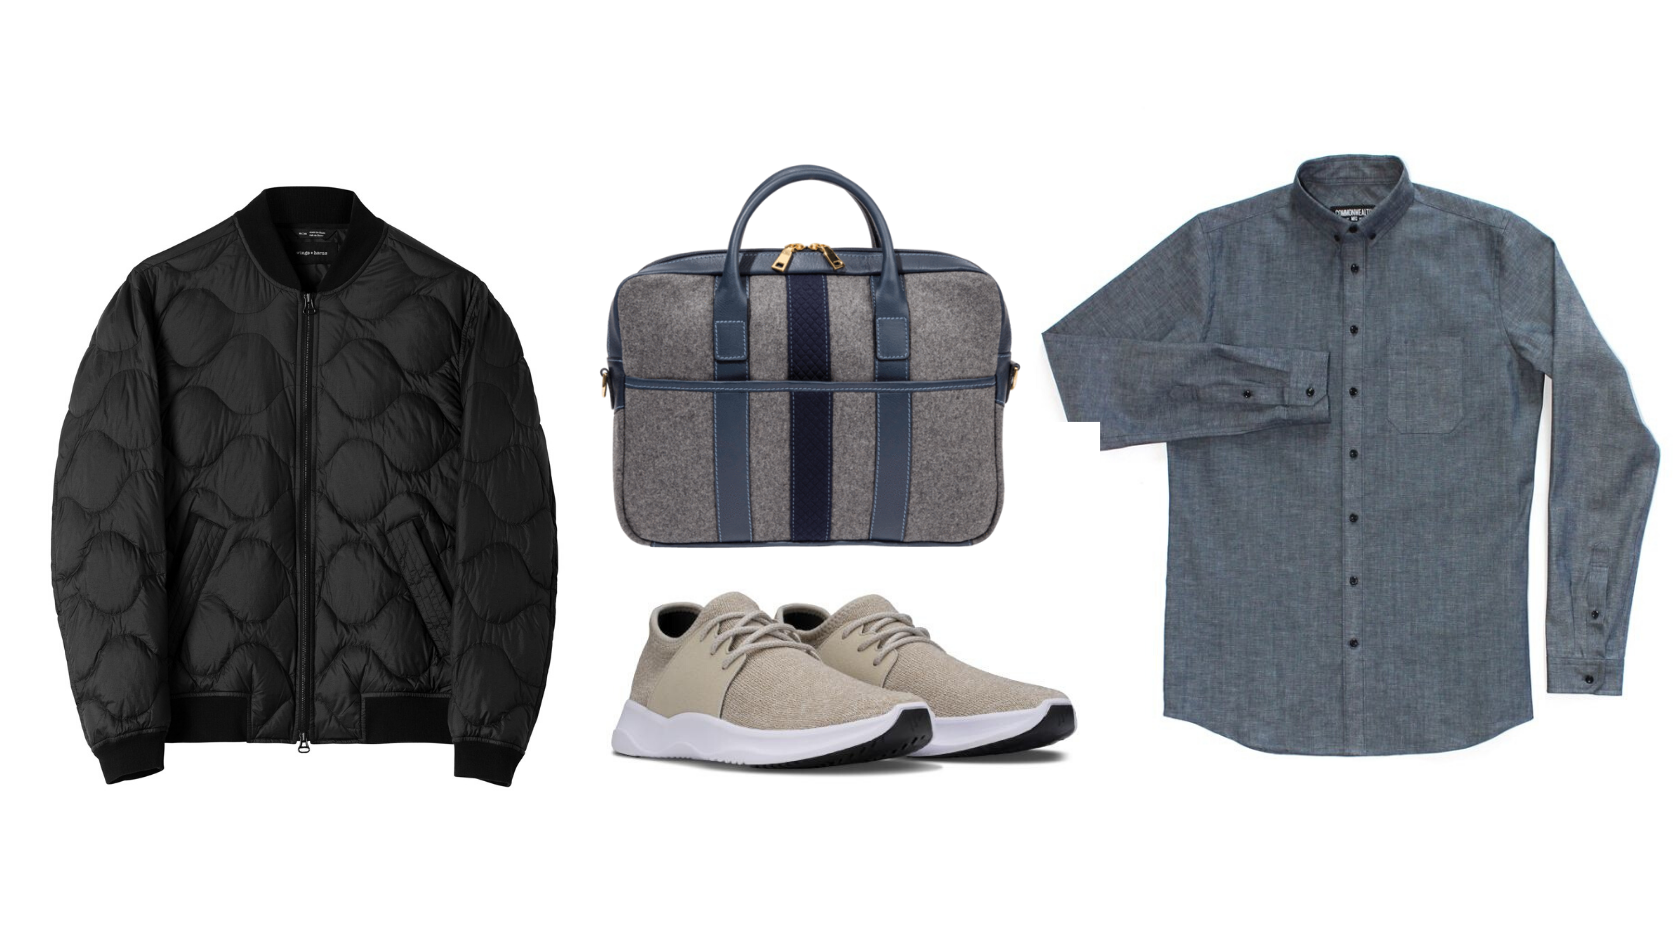 Holiday Gift Guide 2019 - The 7 Best Gifts For Men